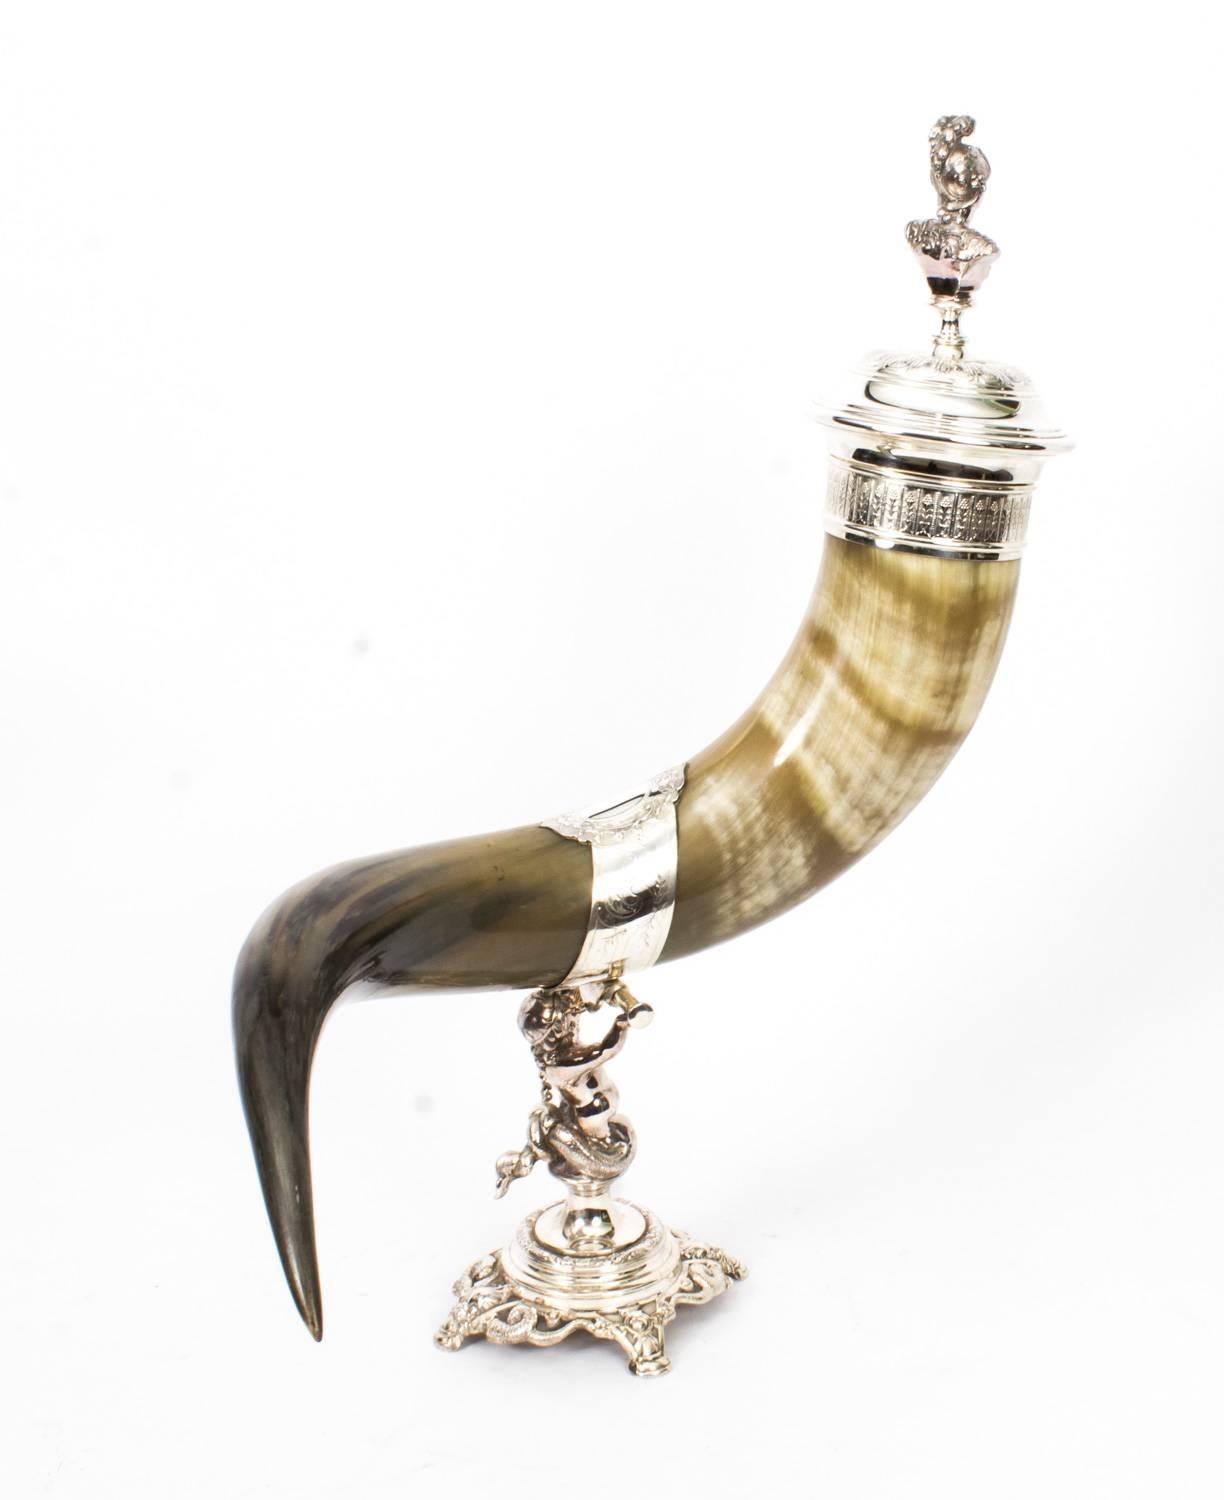 This is a large and decorative antique silver plated horn cornucopia, circa 1890 in date.

The horn is mounted on a detachable silver plated base that rests on a delightful cherub riding a dolphin.

The mounts and plaques have engraved and